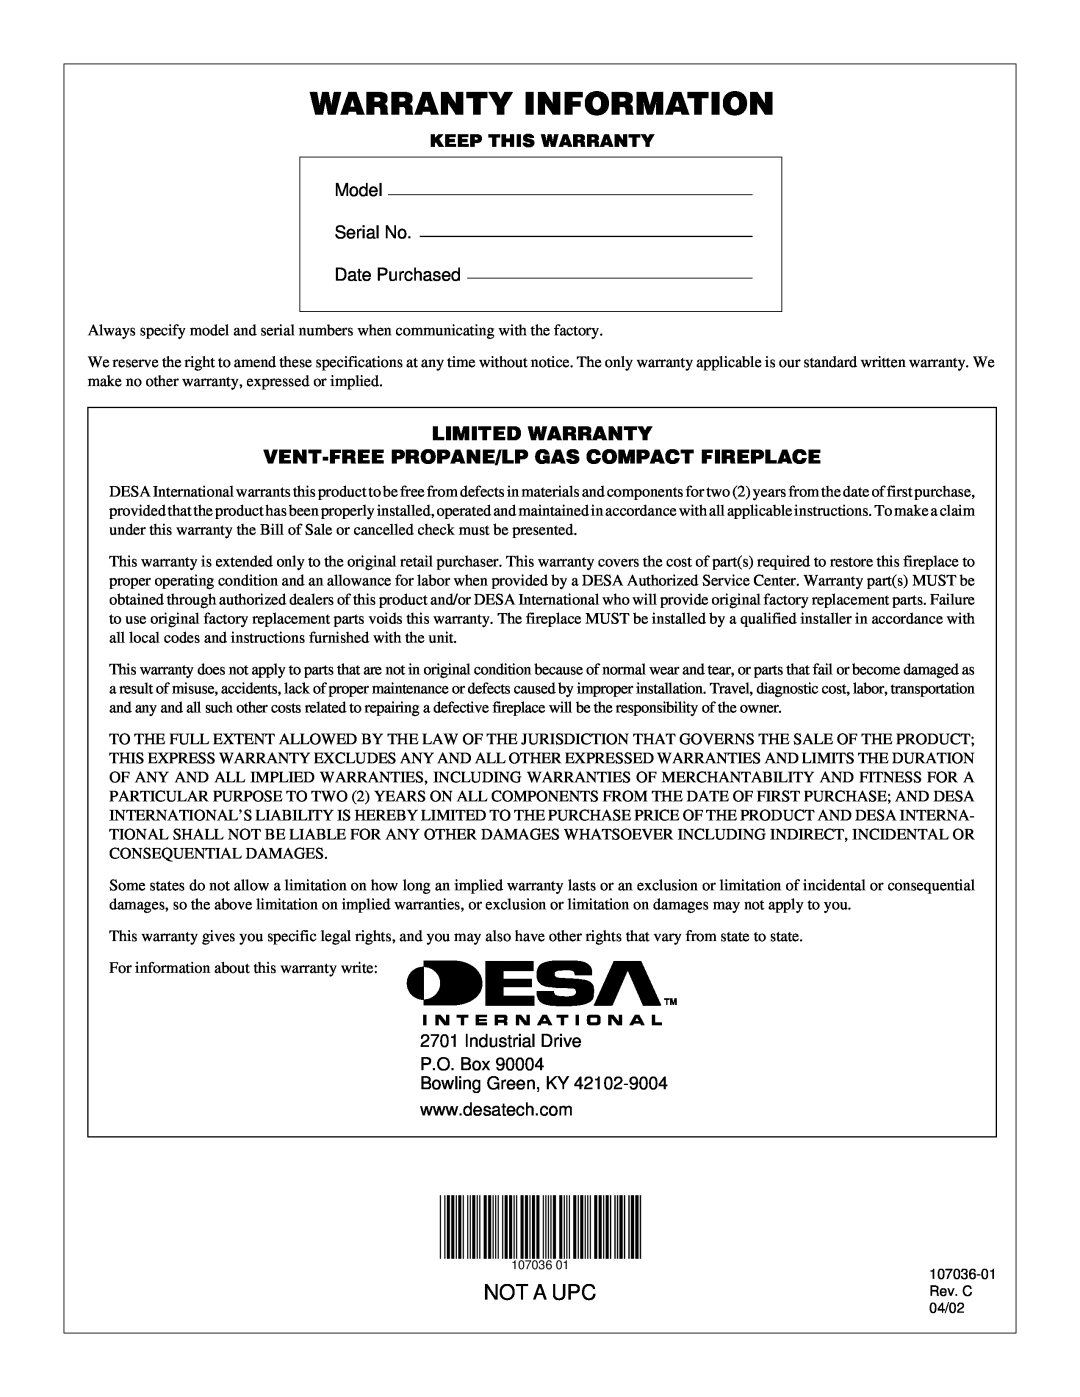 Desa 000 to 26 Warranty Information, Limited Warranty, Vent-Freepropane/Lp Gas Compact Fireplace, NOT A UPCRev. C 